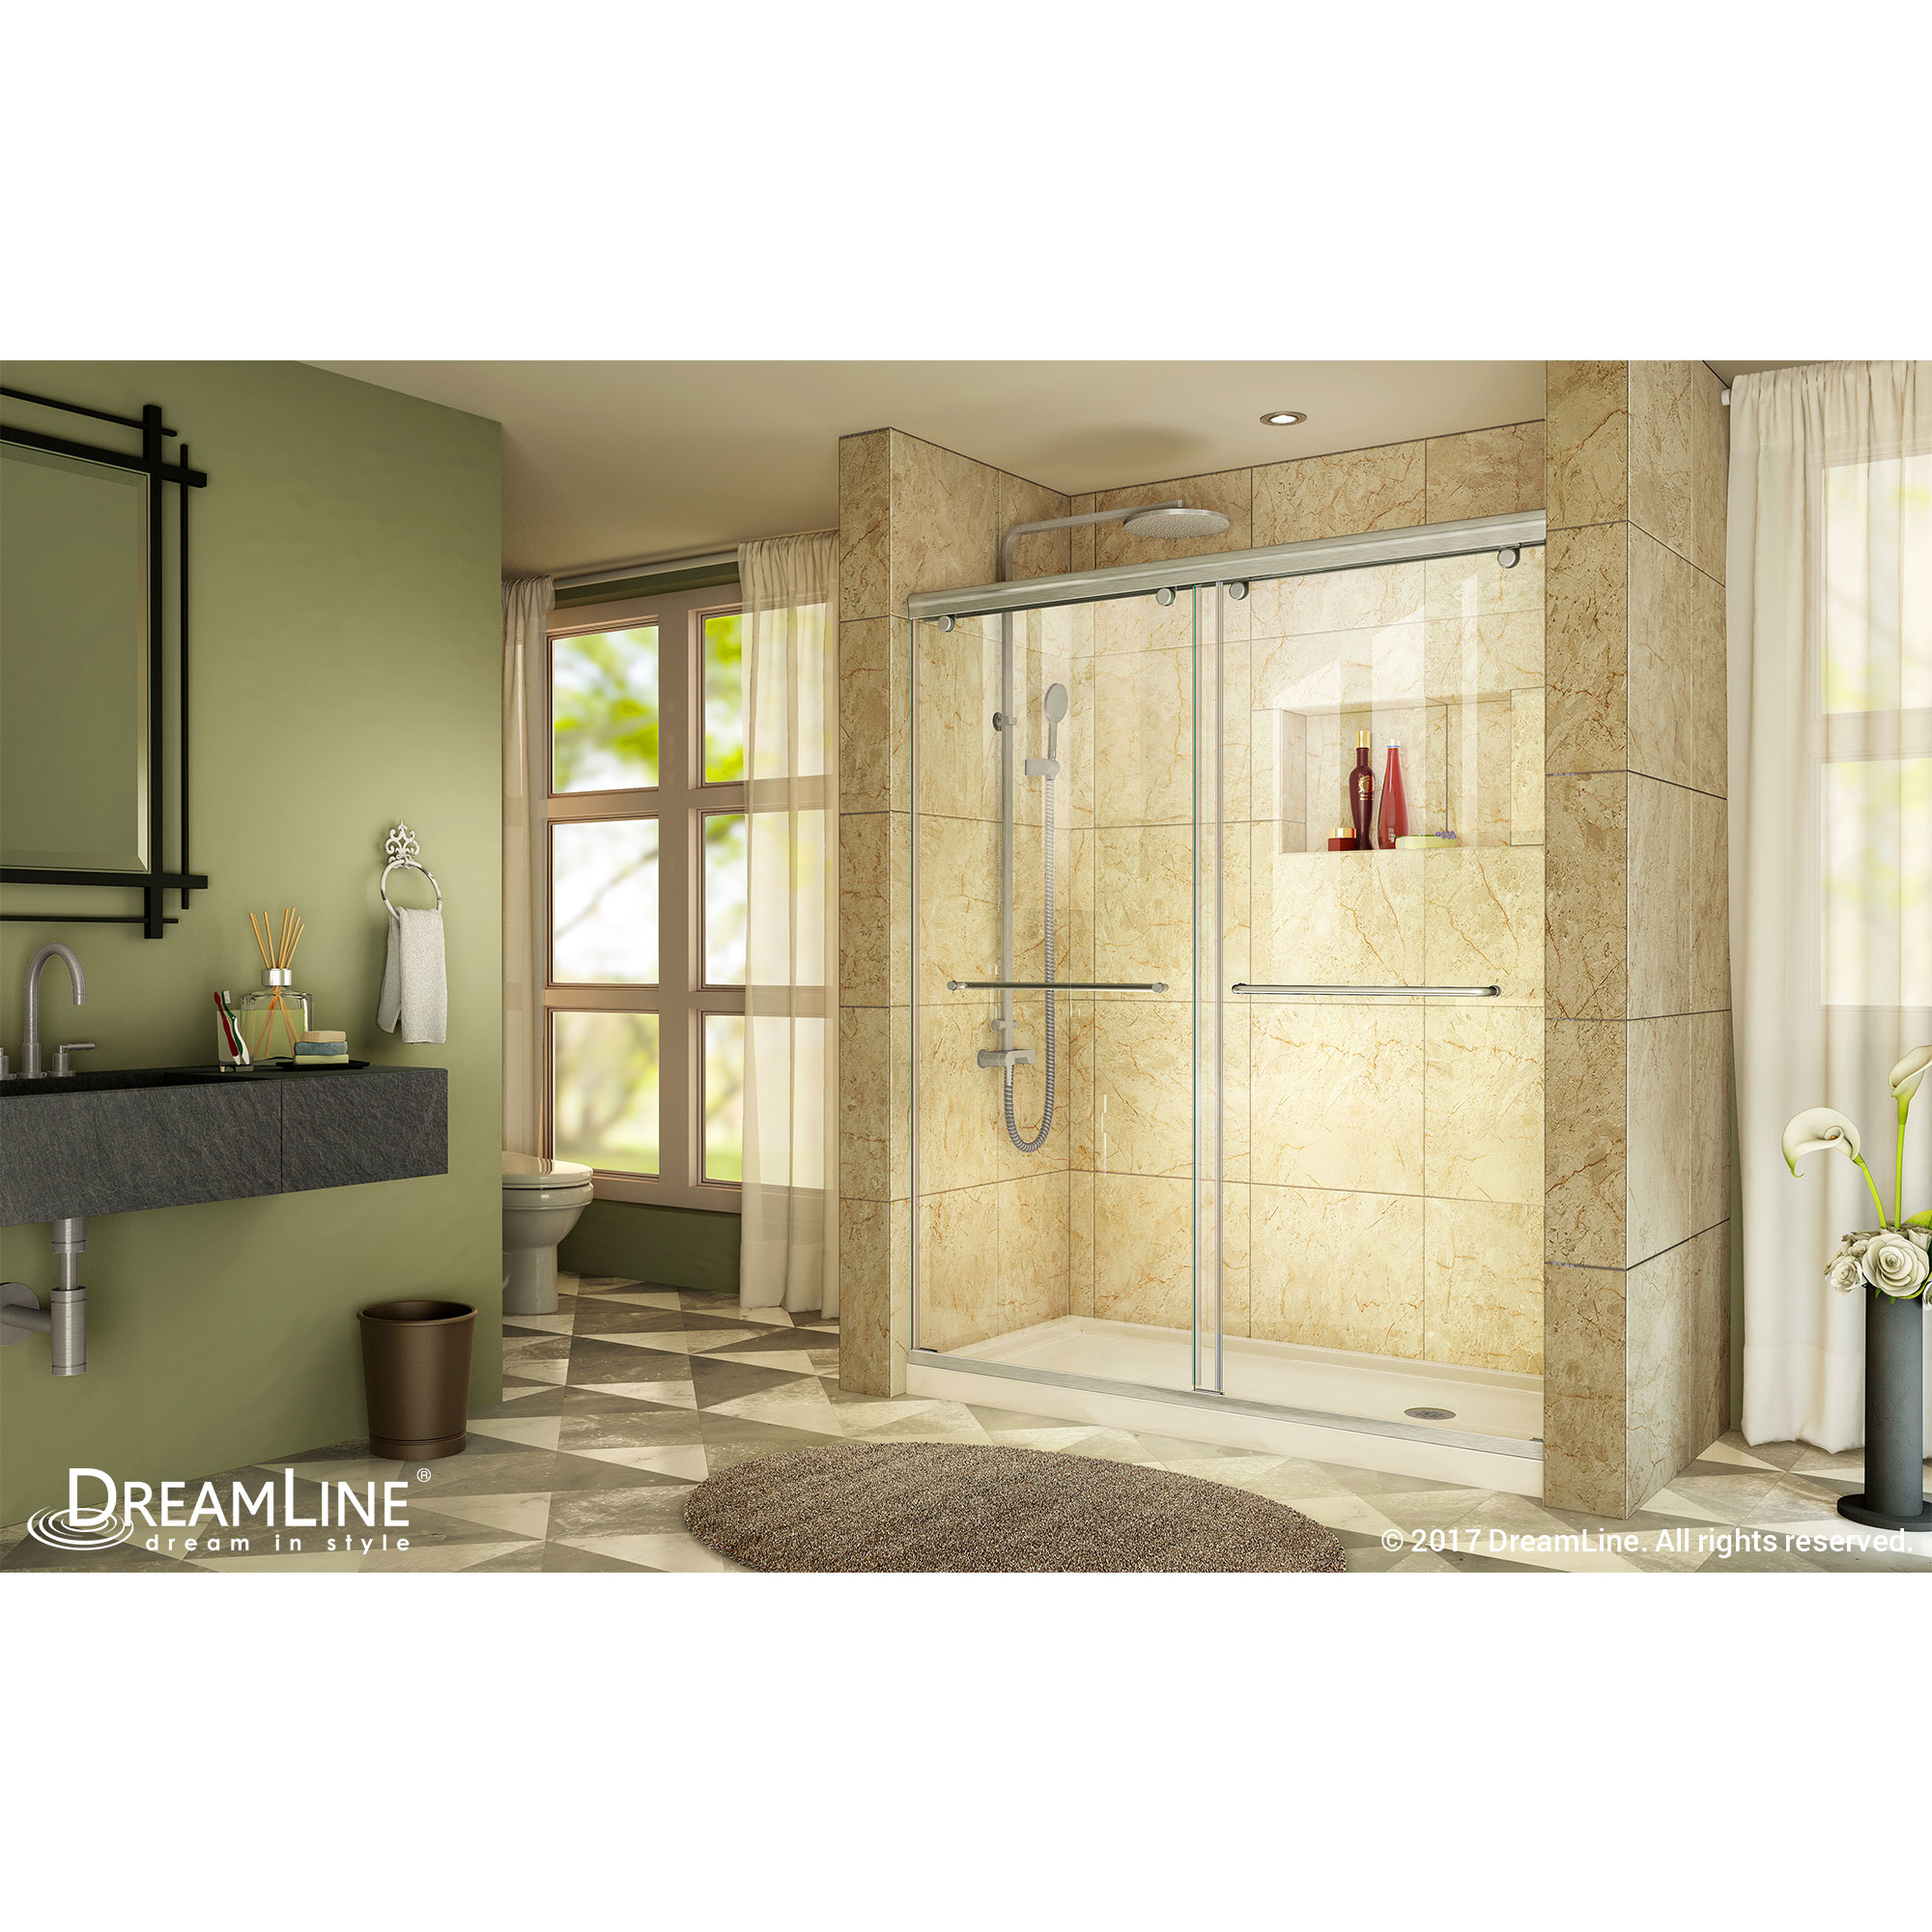 DreamLine Charisma 32 in. D x 60 in. W x 78 3/4 in. H Bypass Shower Door in Brushed Nickel with Right Drain Biscuit Base Kit